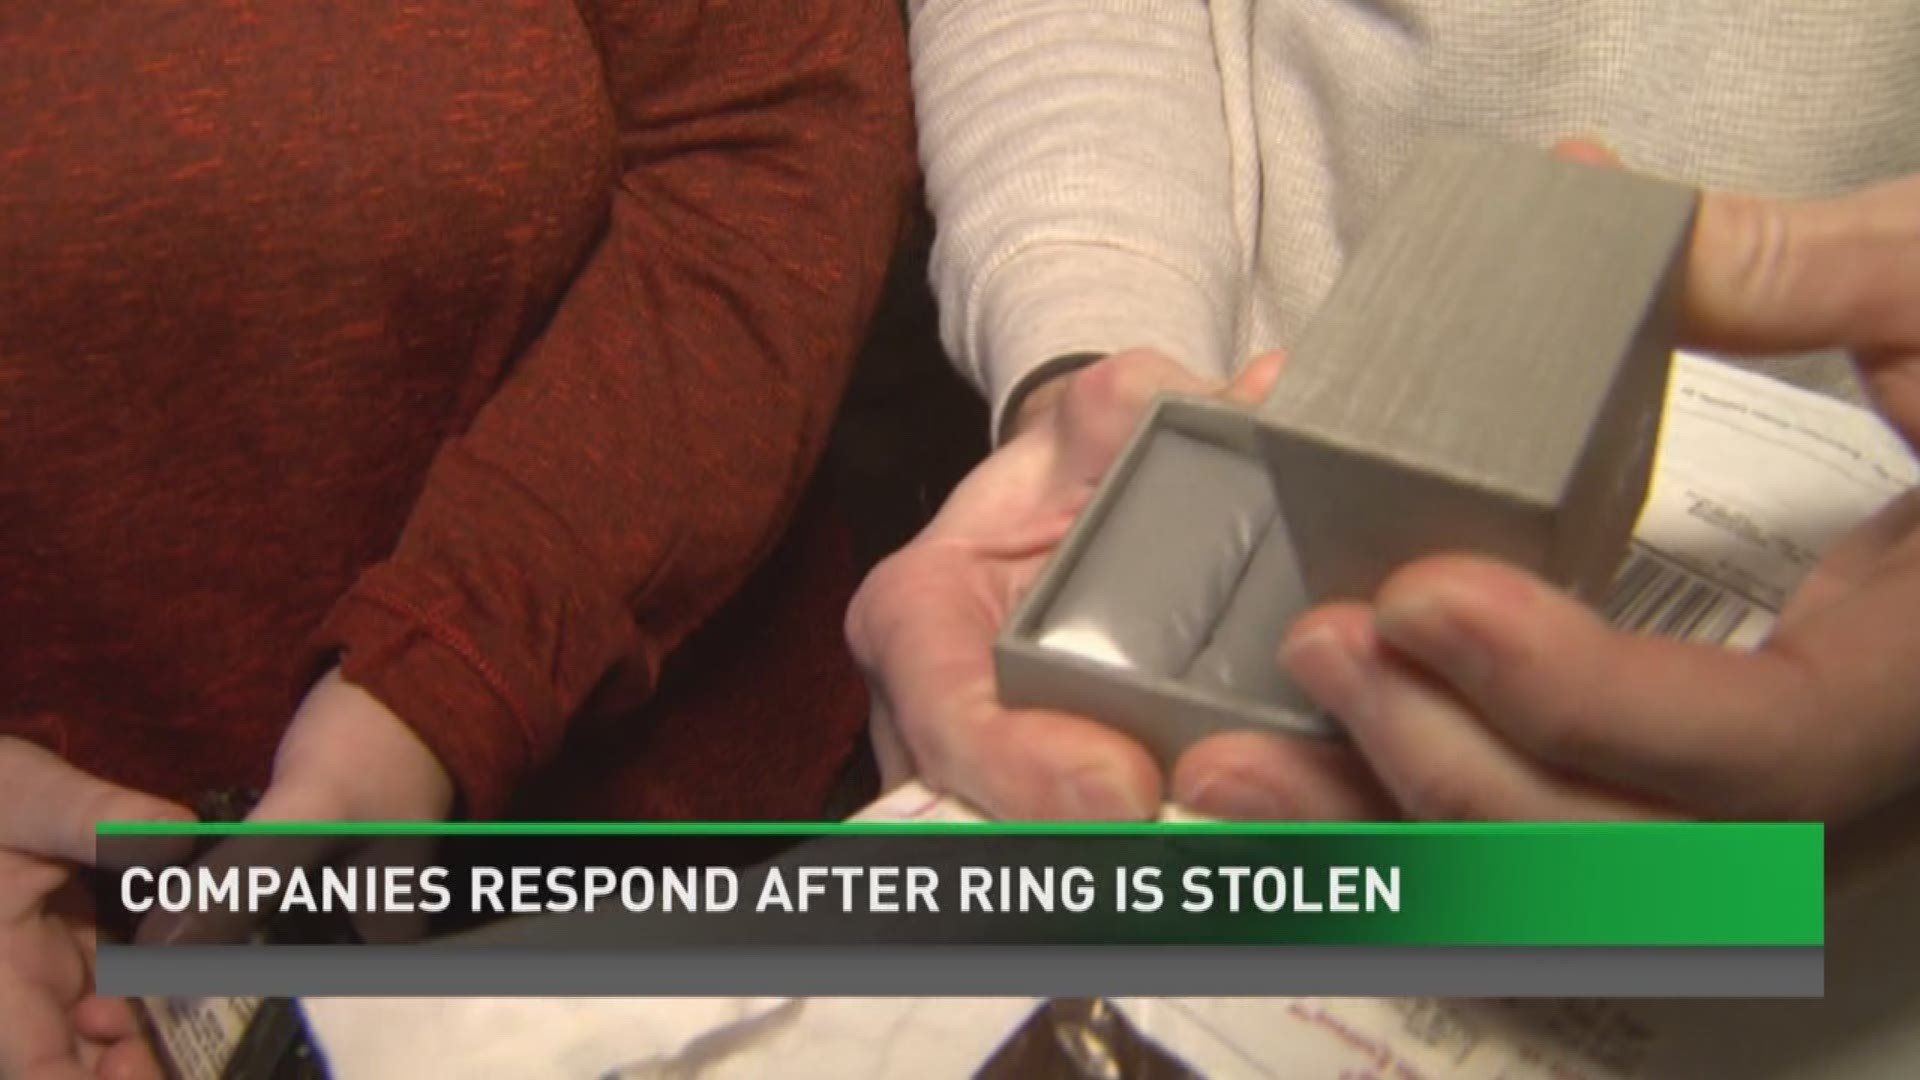 Companies respond after ring is stolen